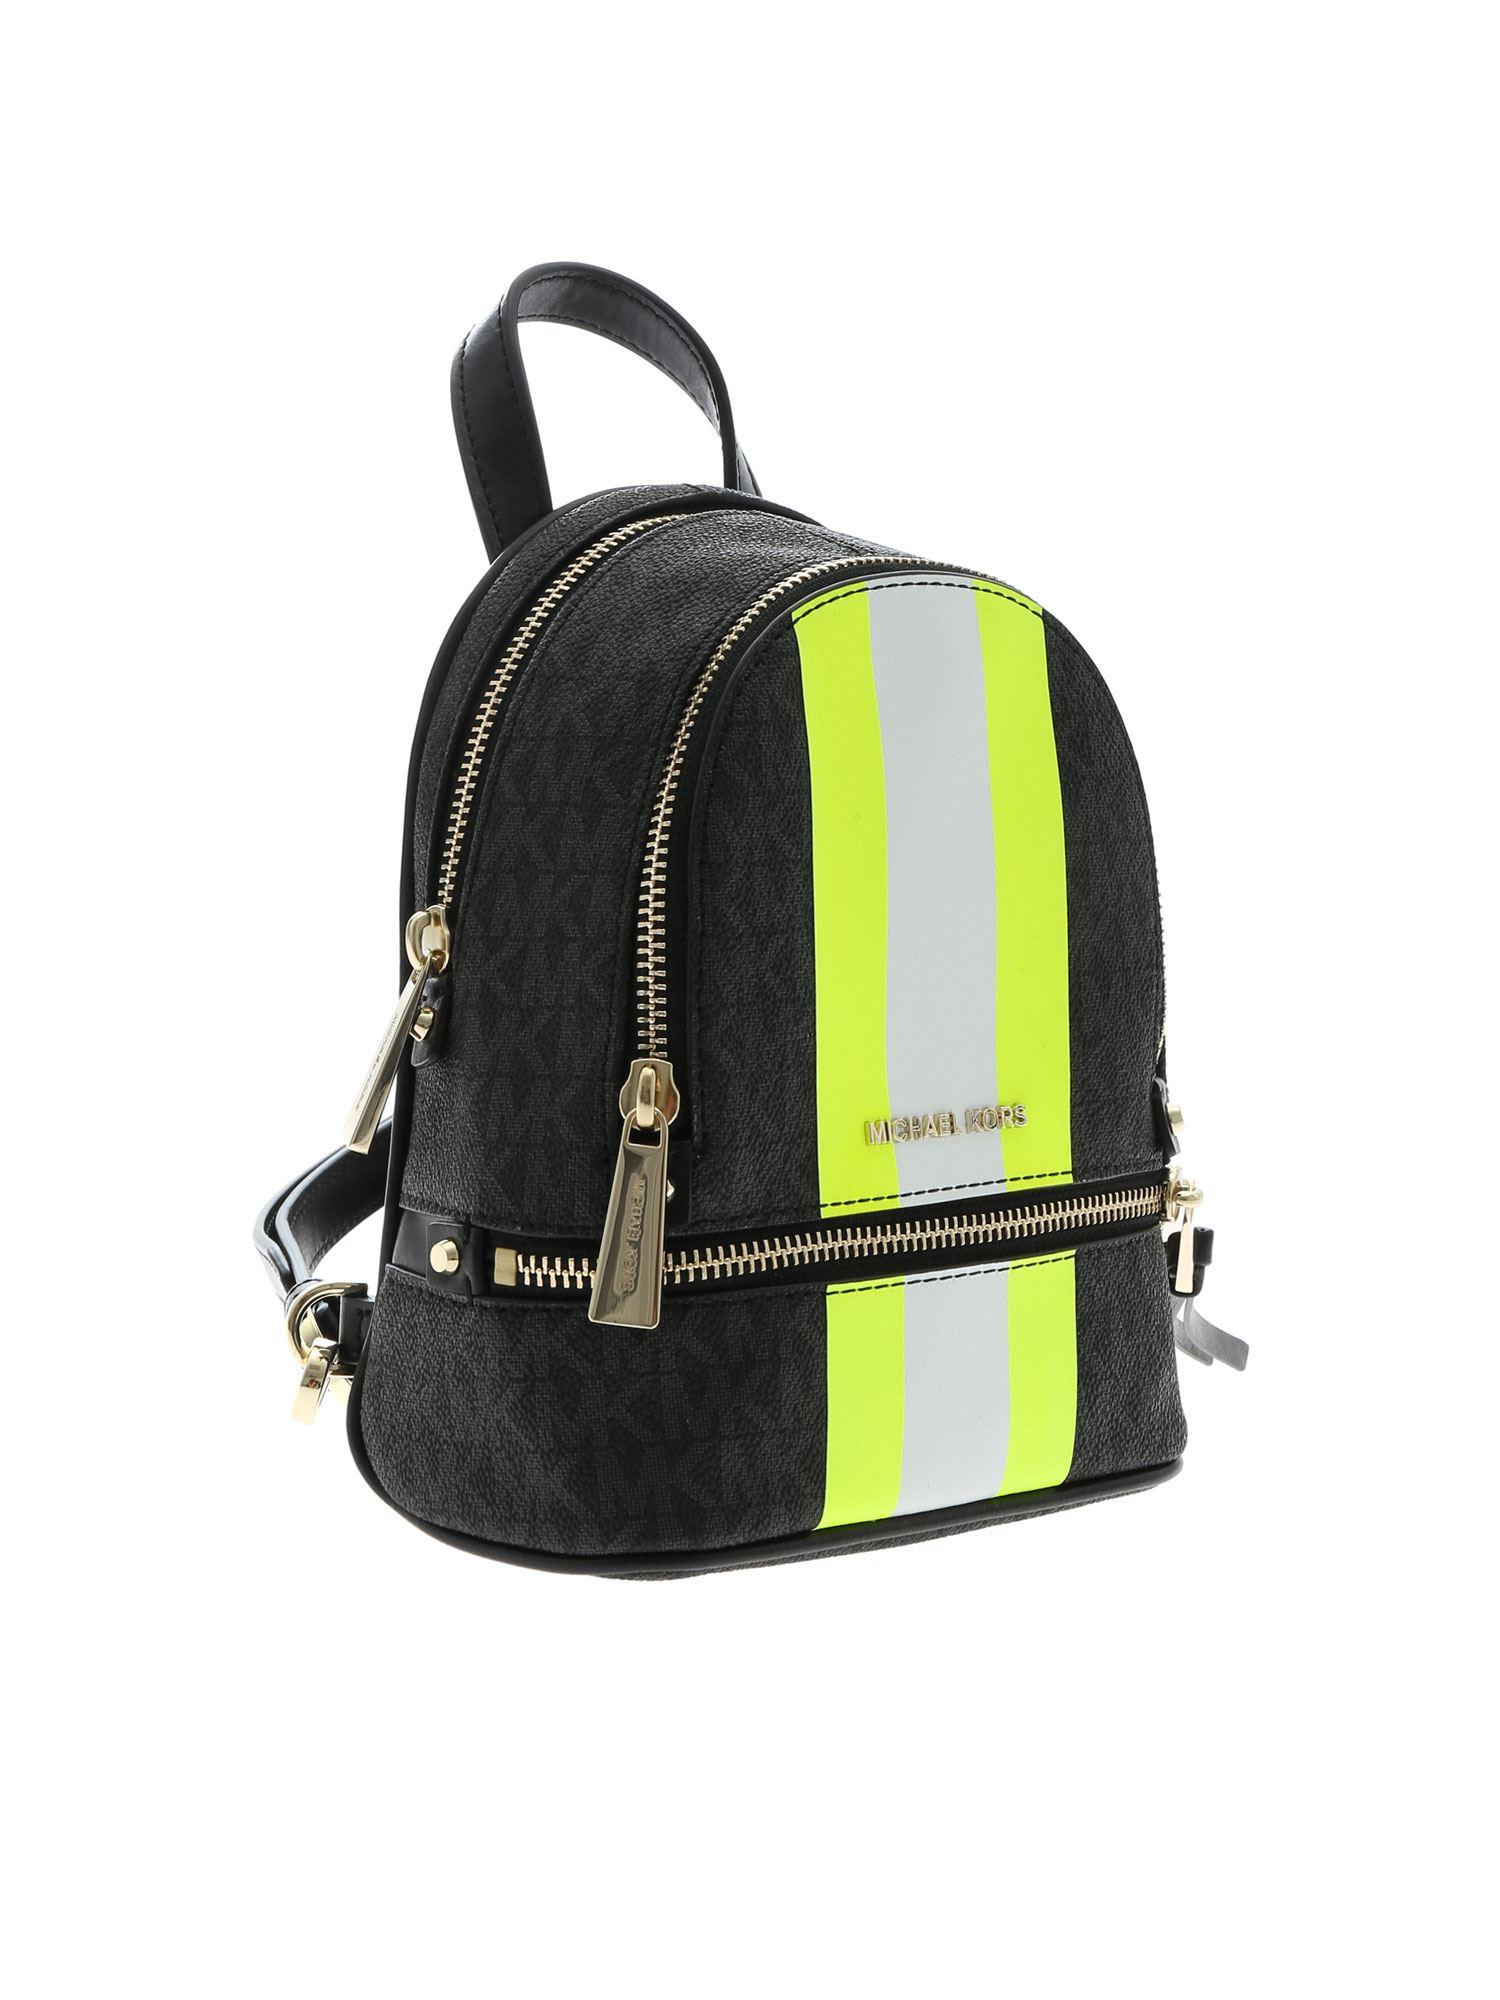 Michael Kors Black Backpack With Neon Yellow Print - Lyst